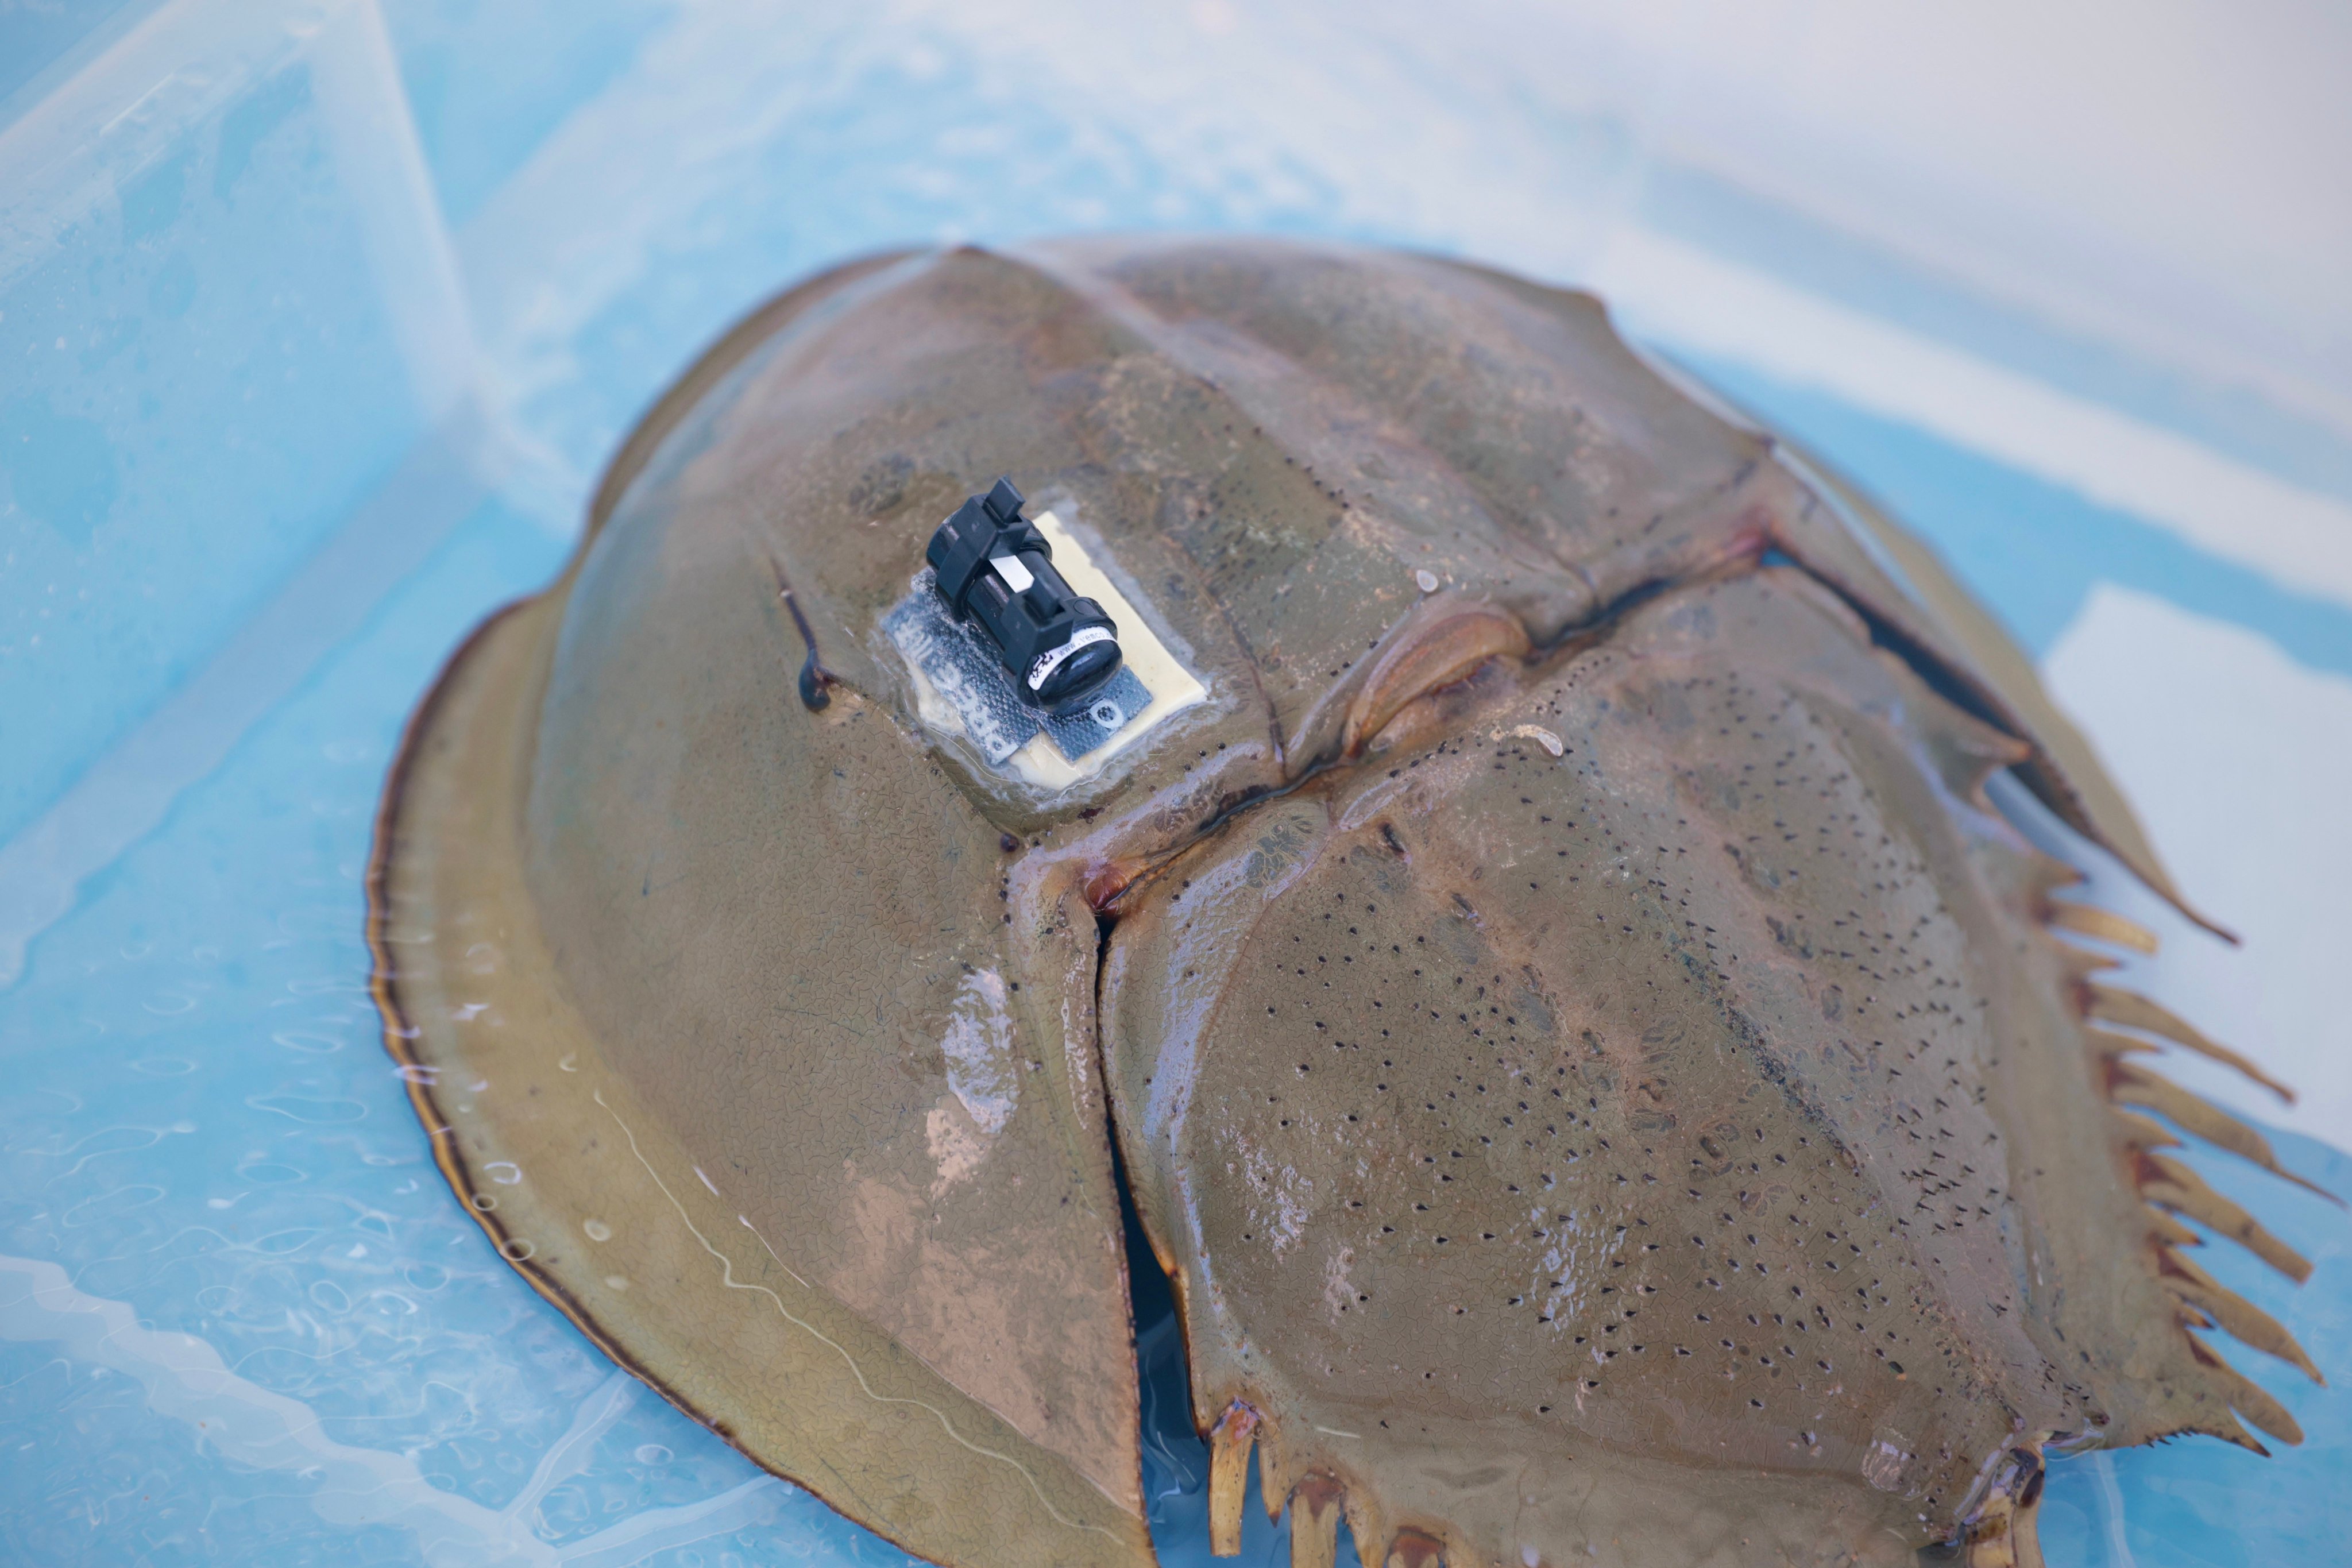 One of the tagged horseshoe crabs, which conservationists will observe to help conserve the species better.  Photo: Handout